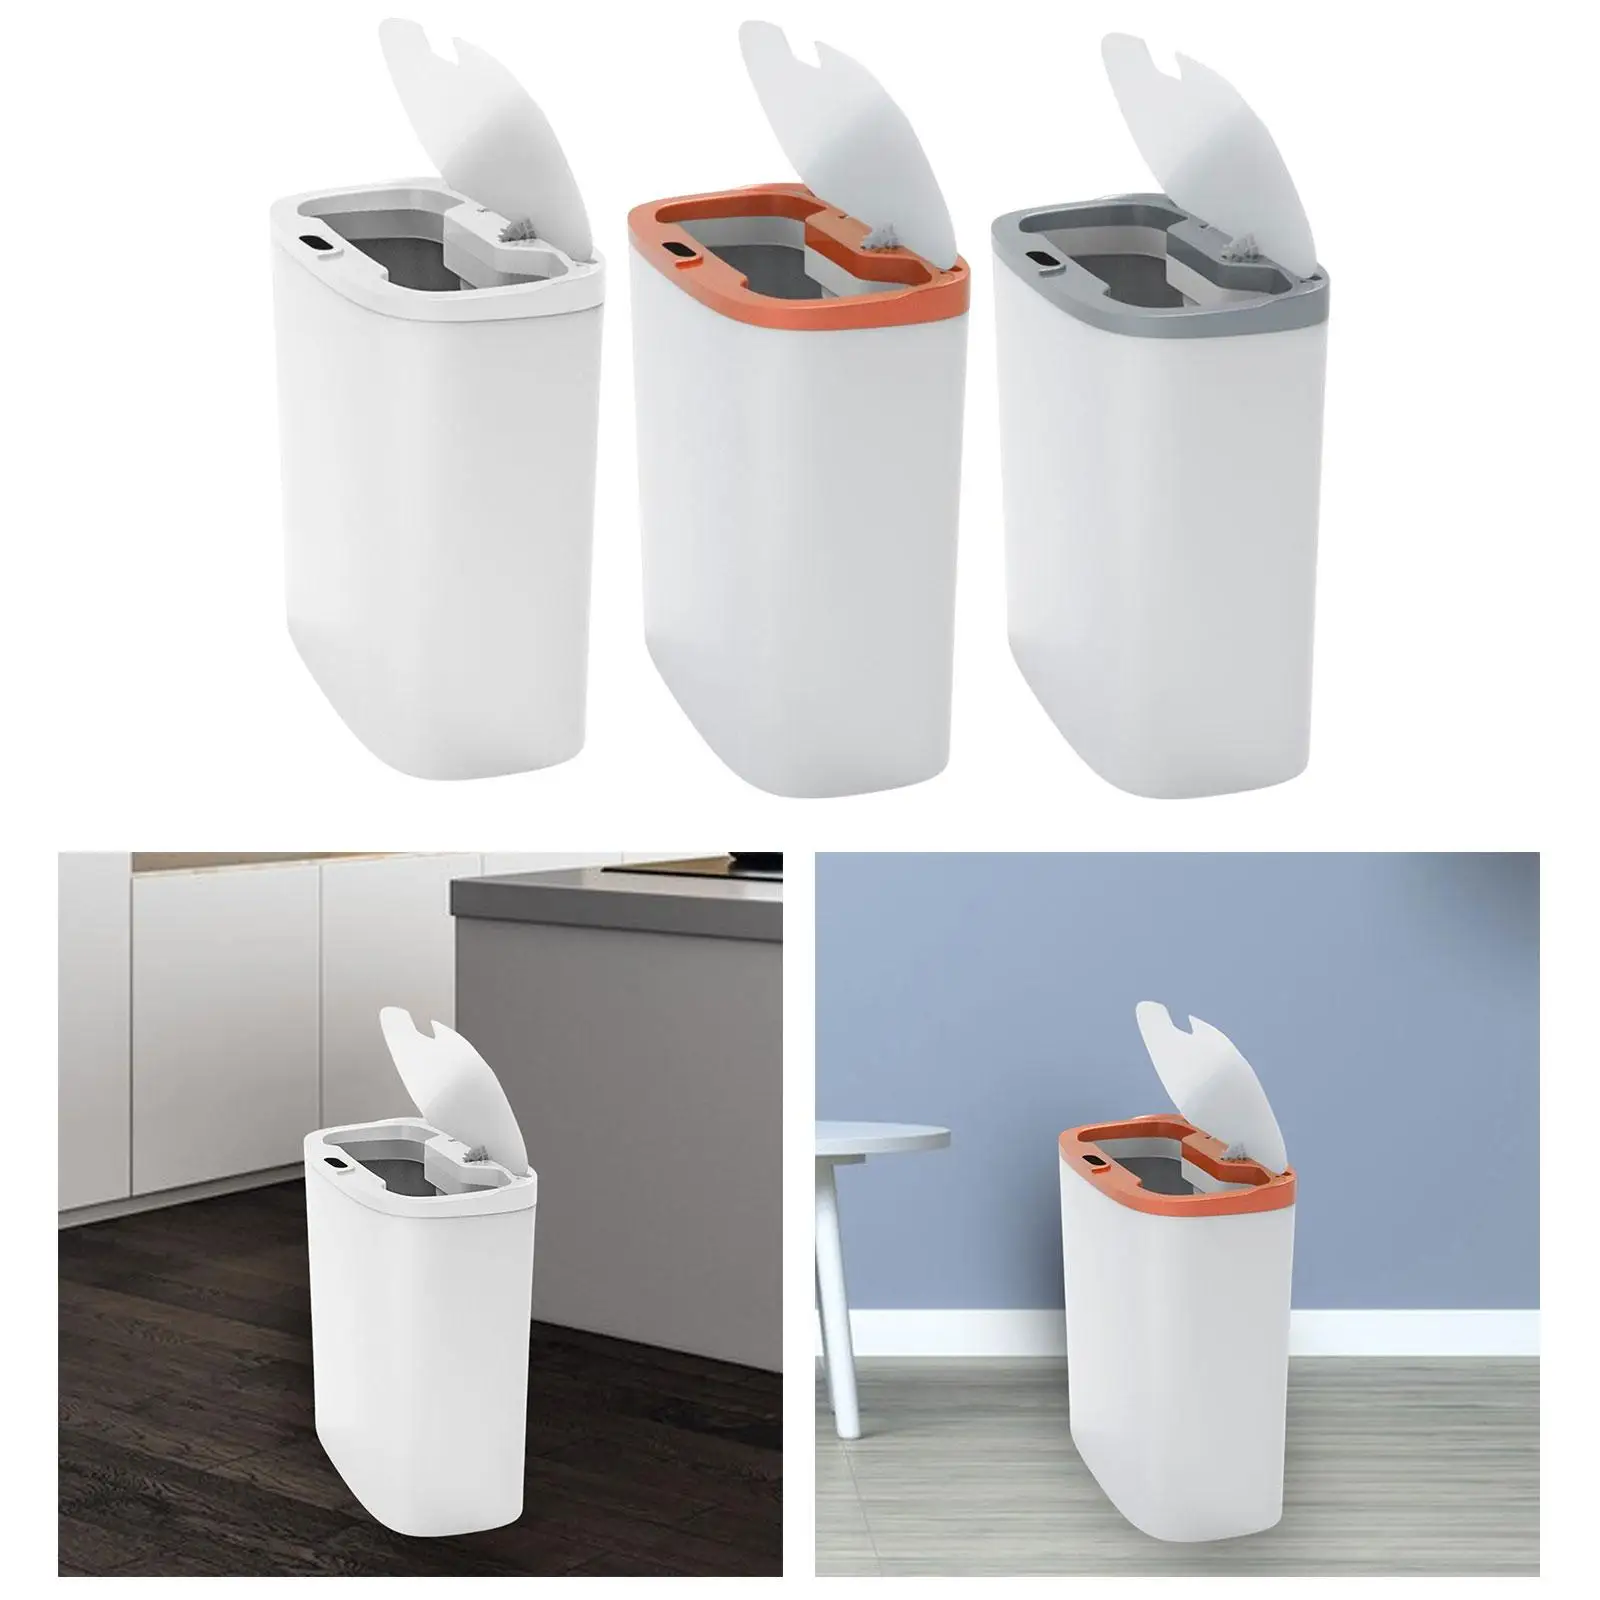 Automatic Intelligent Trash Can Touch Free 14L Capacity for Bathroom Office